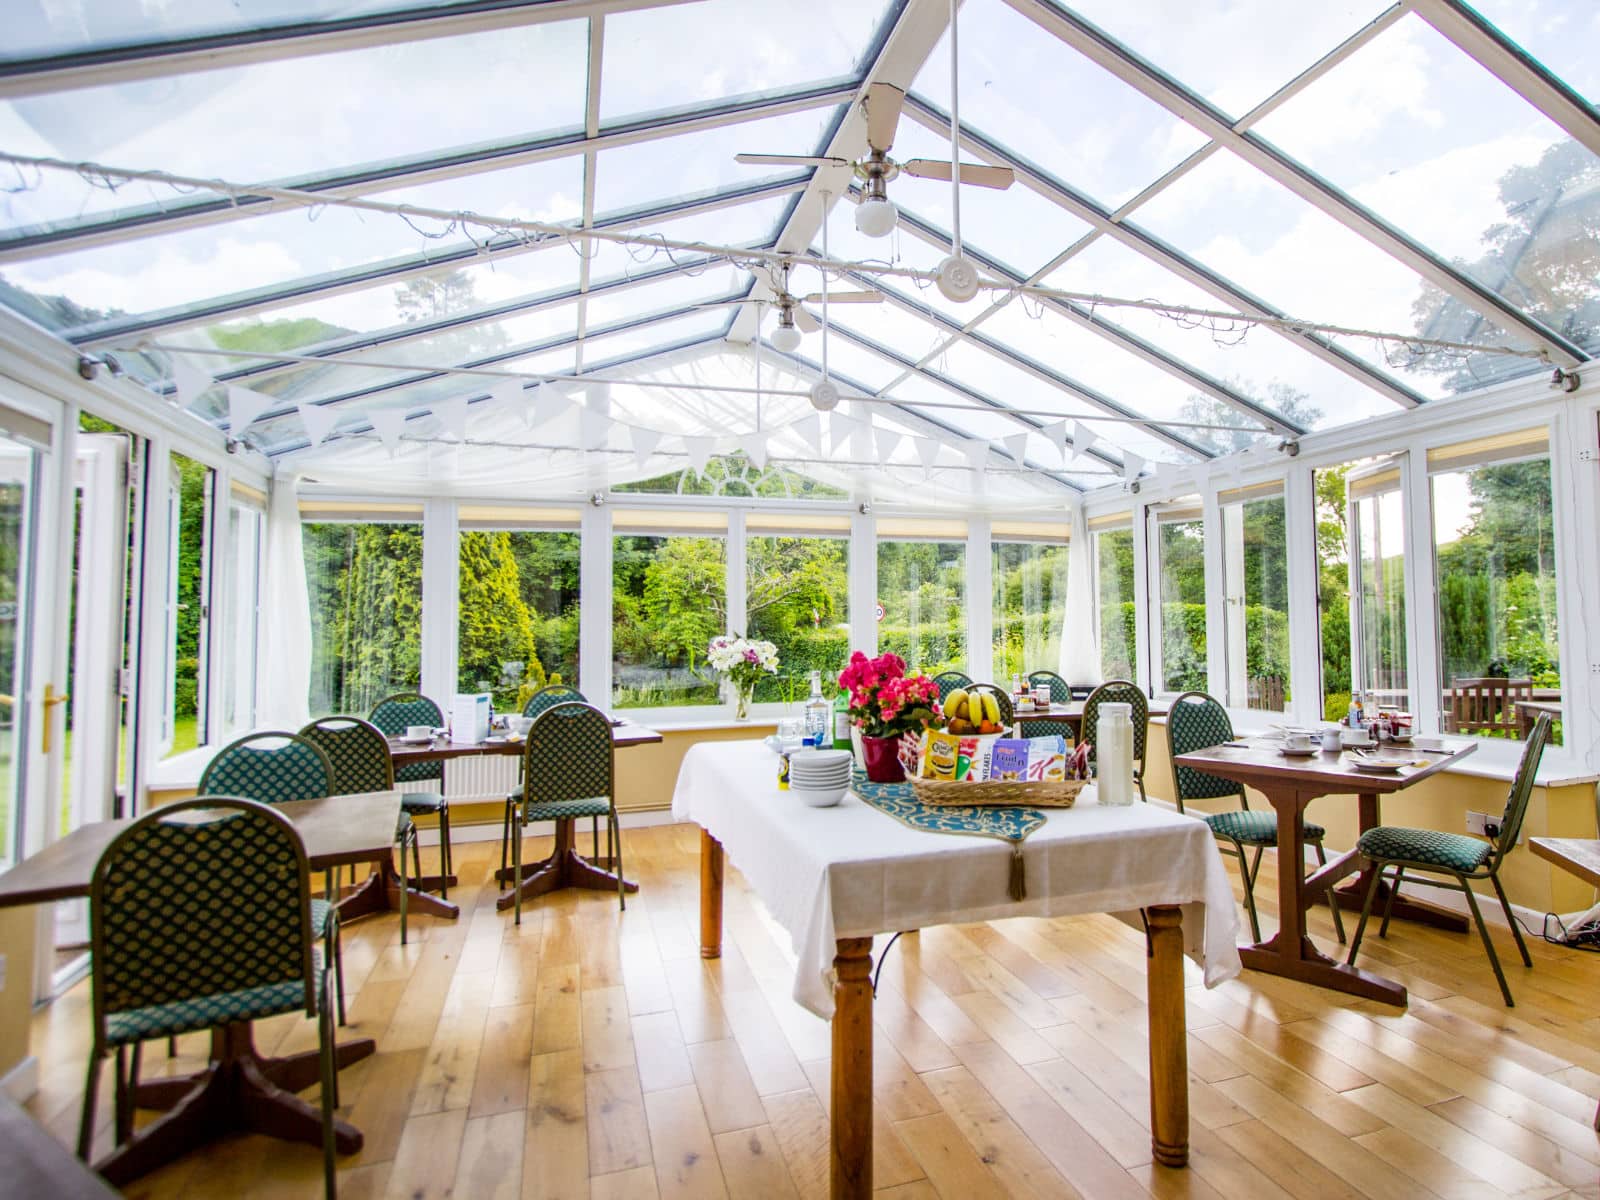 The conservatory at Polraen Country House